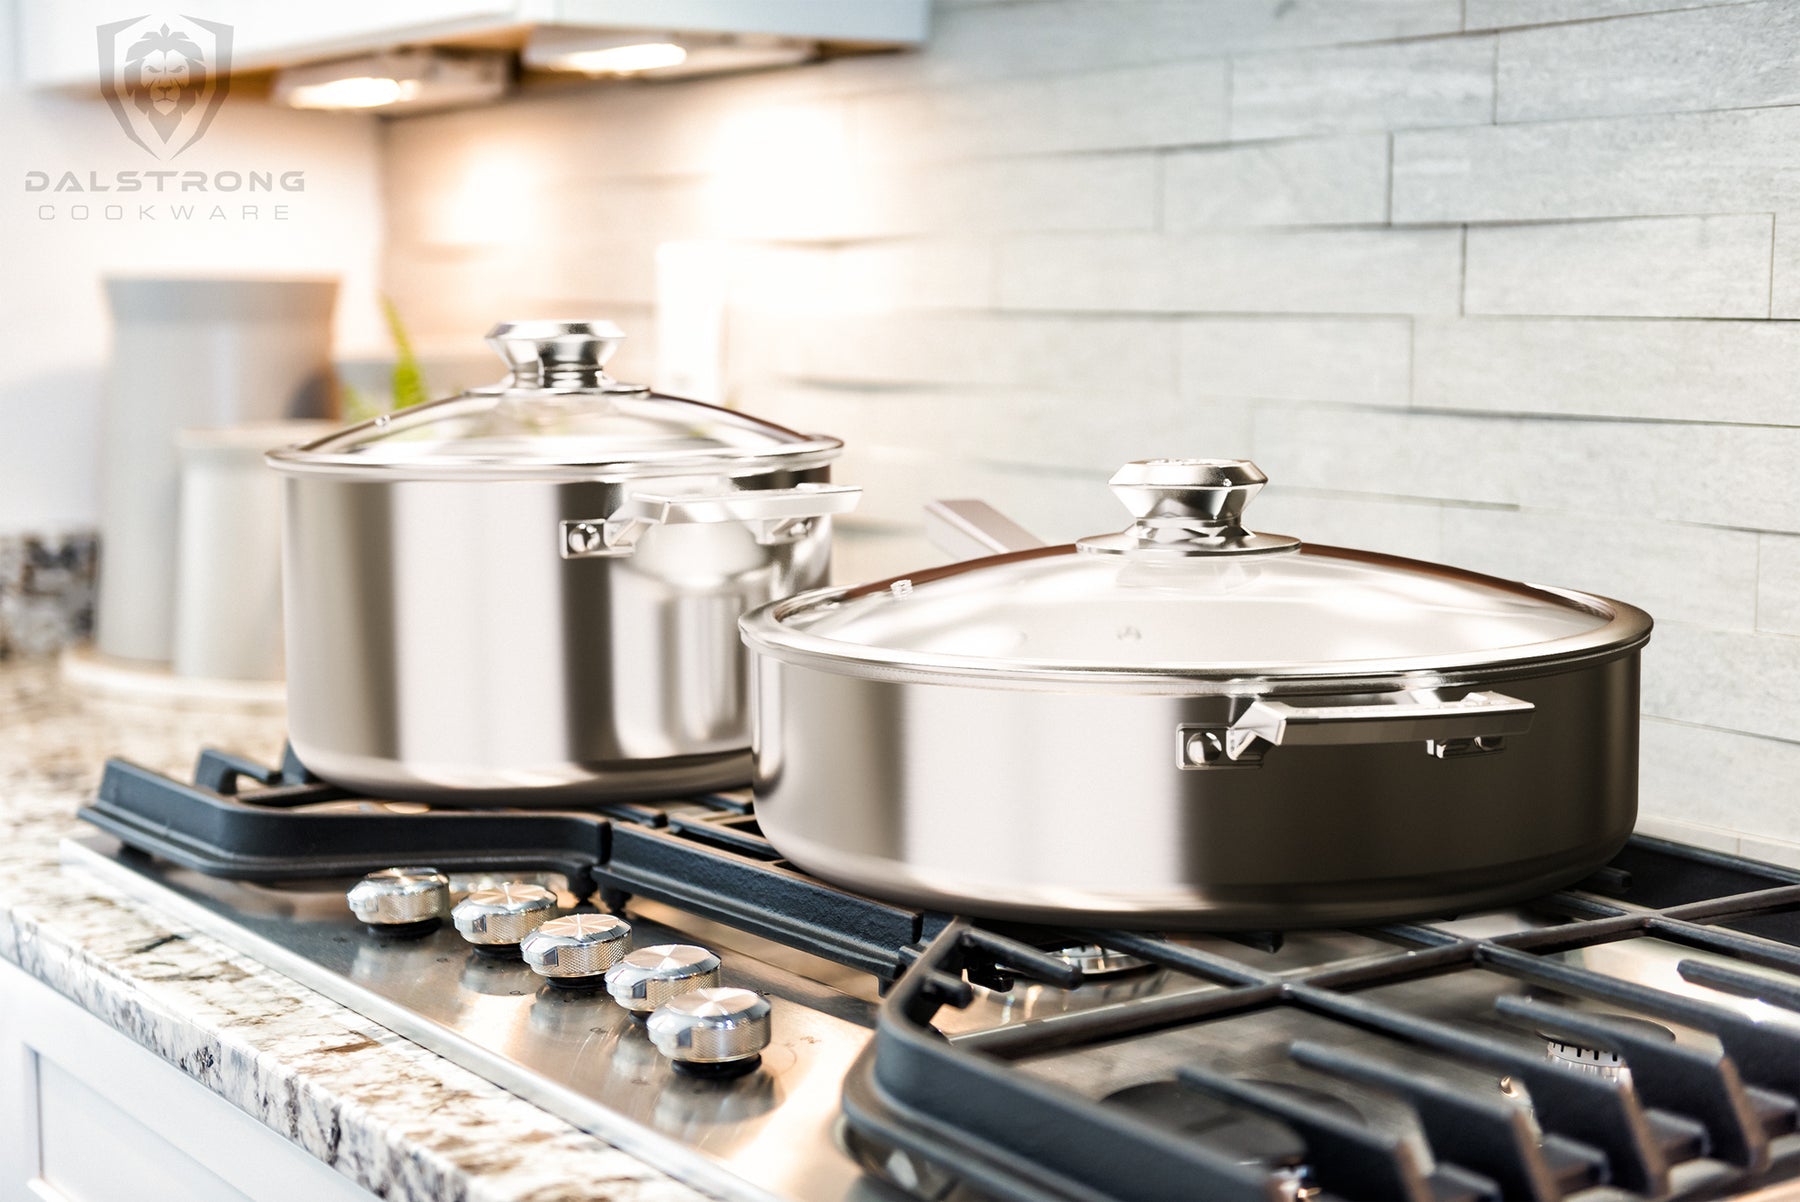 How To Find And Buy The Best Pots And Pans Set in 2023 – Dalstrong